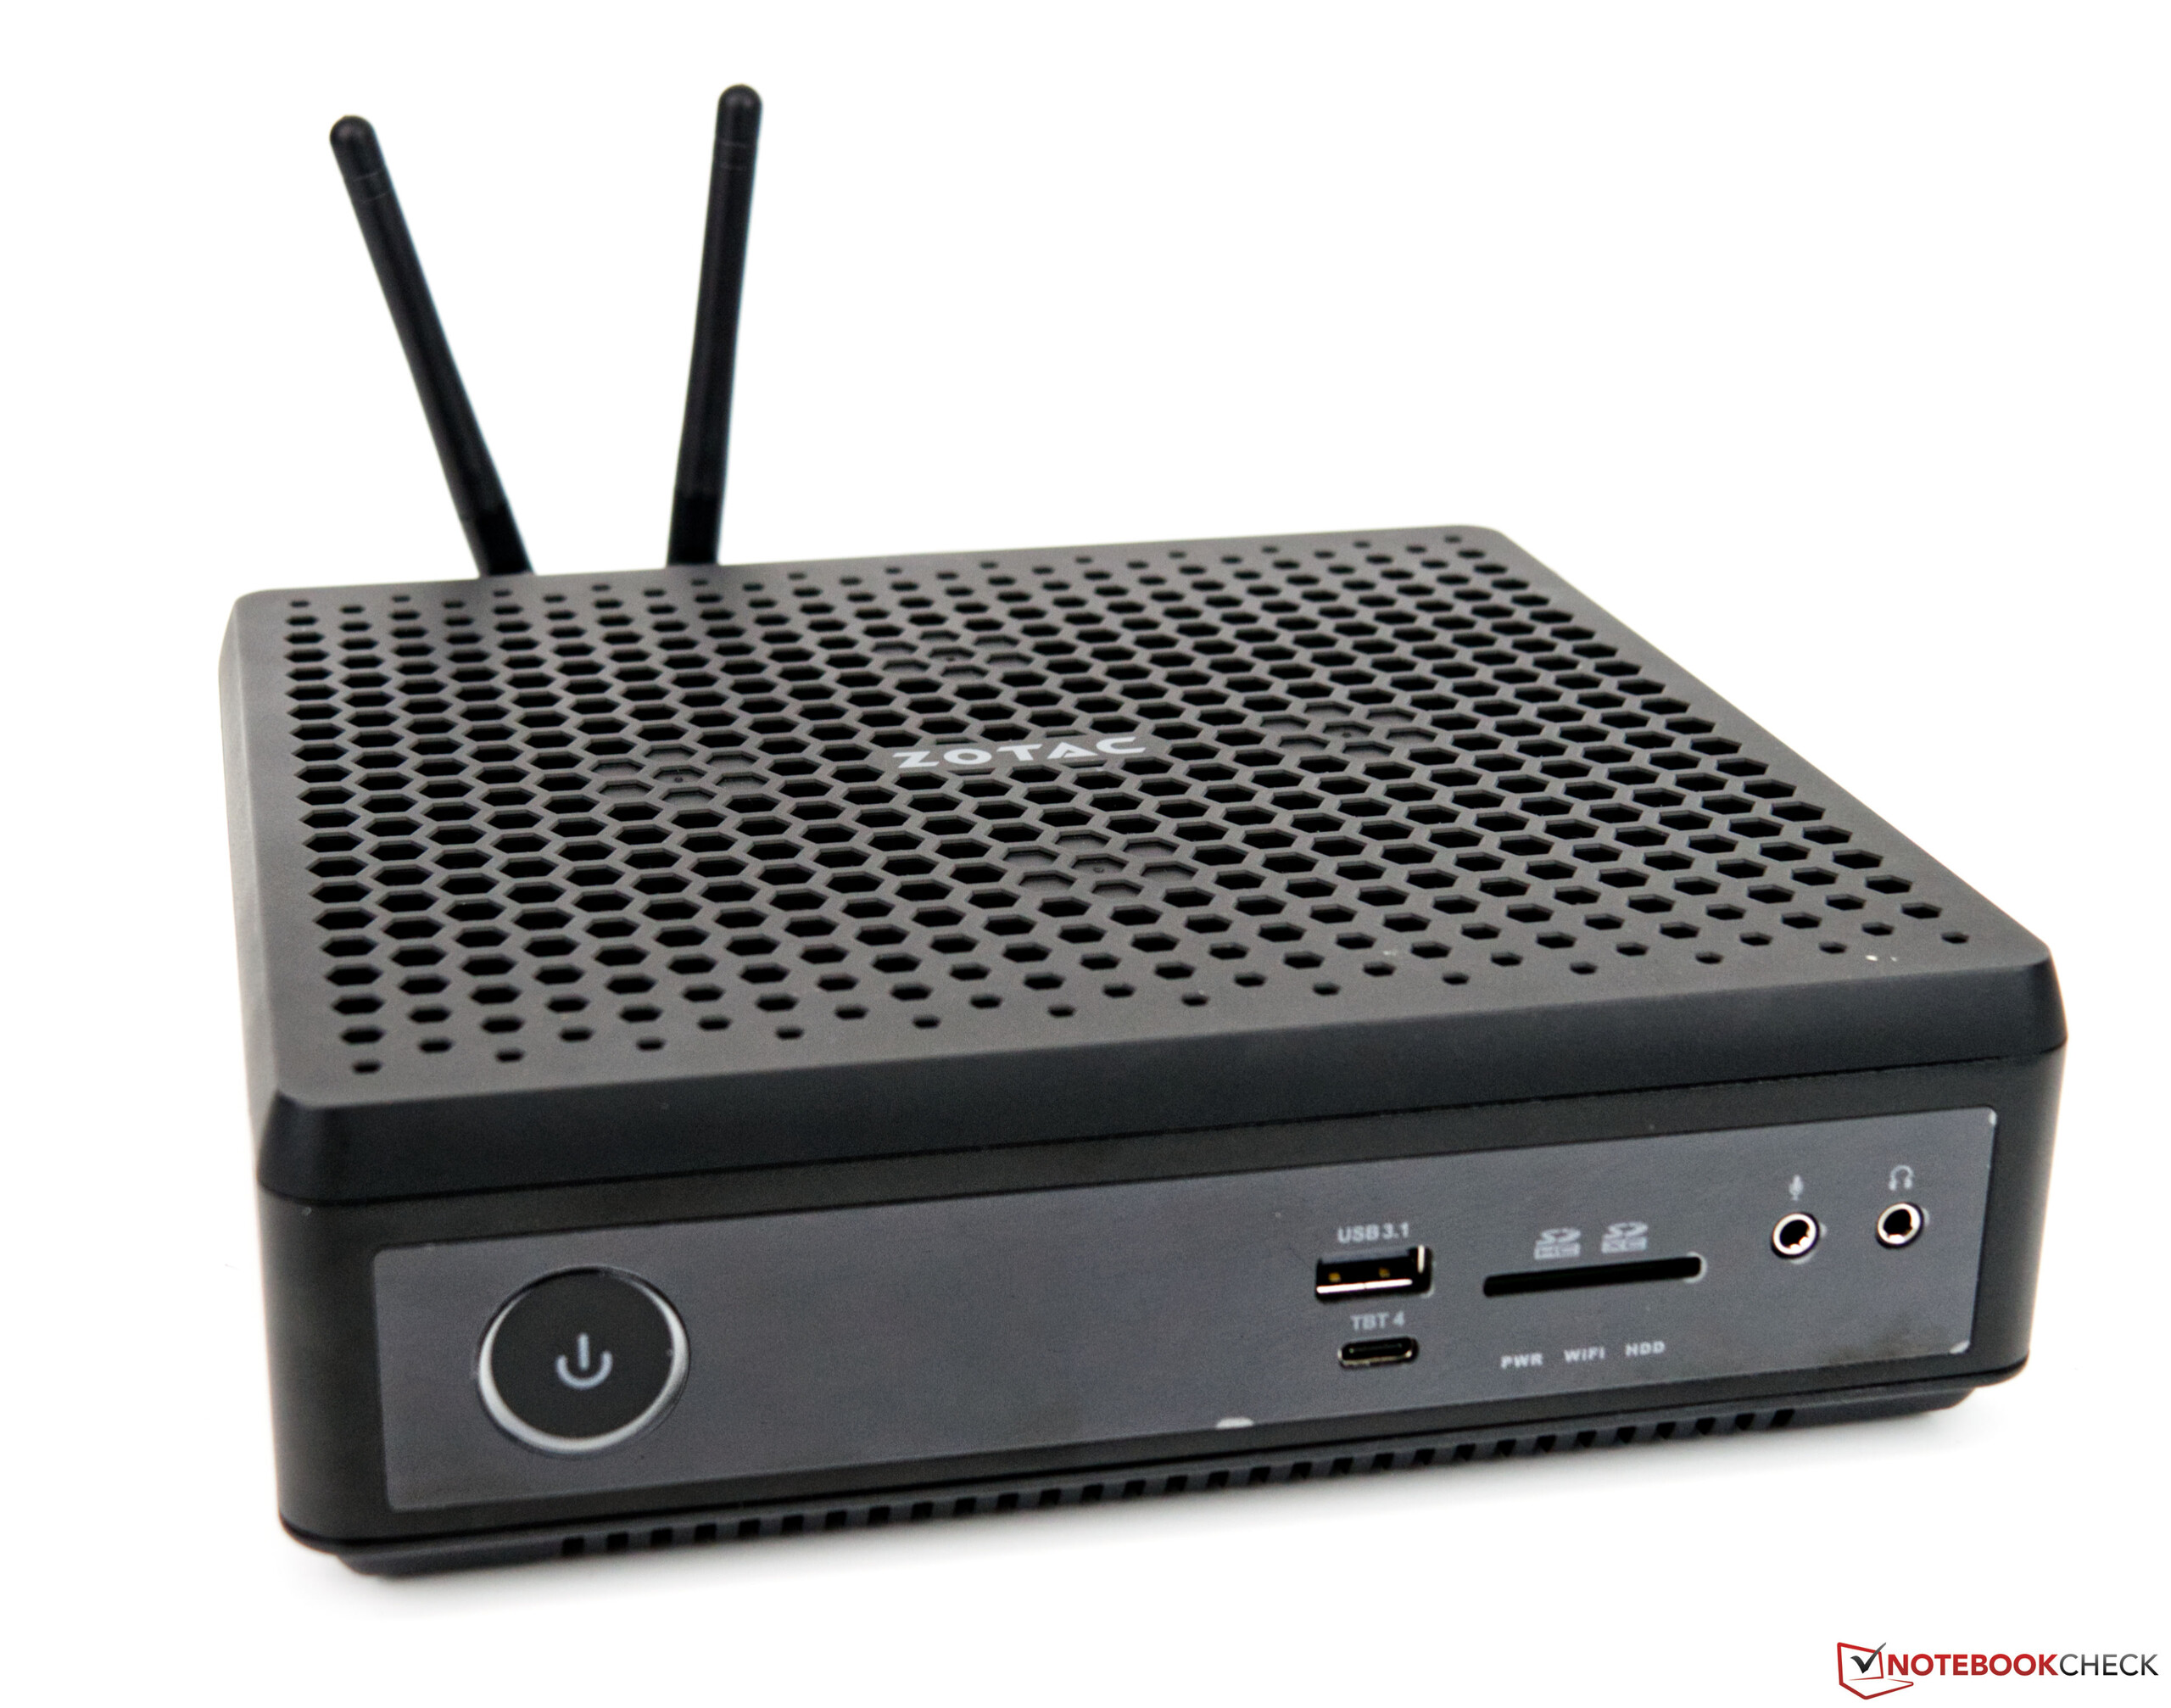 Blowing hot air: review of tiny Zotac mini PC that comes with